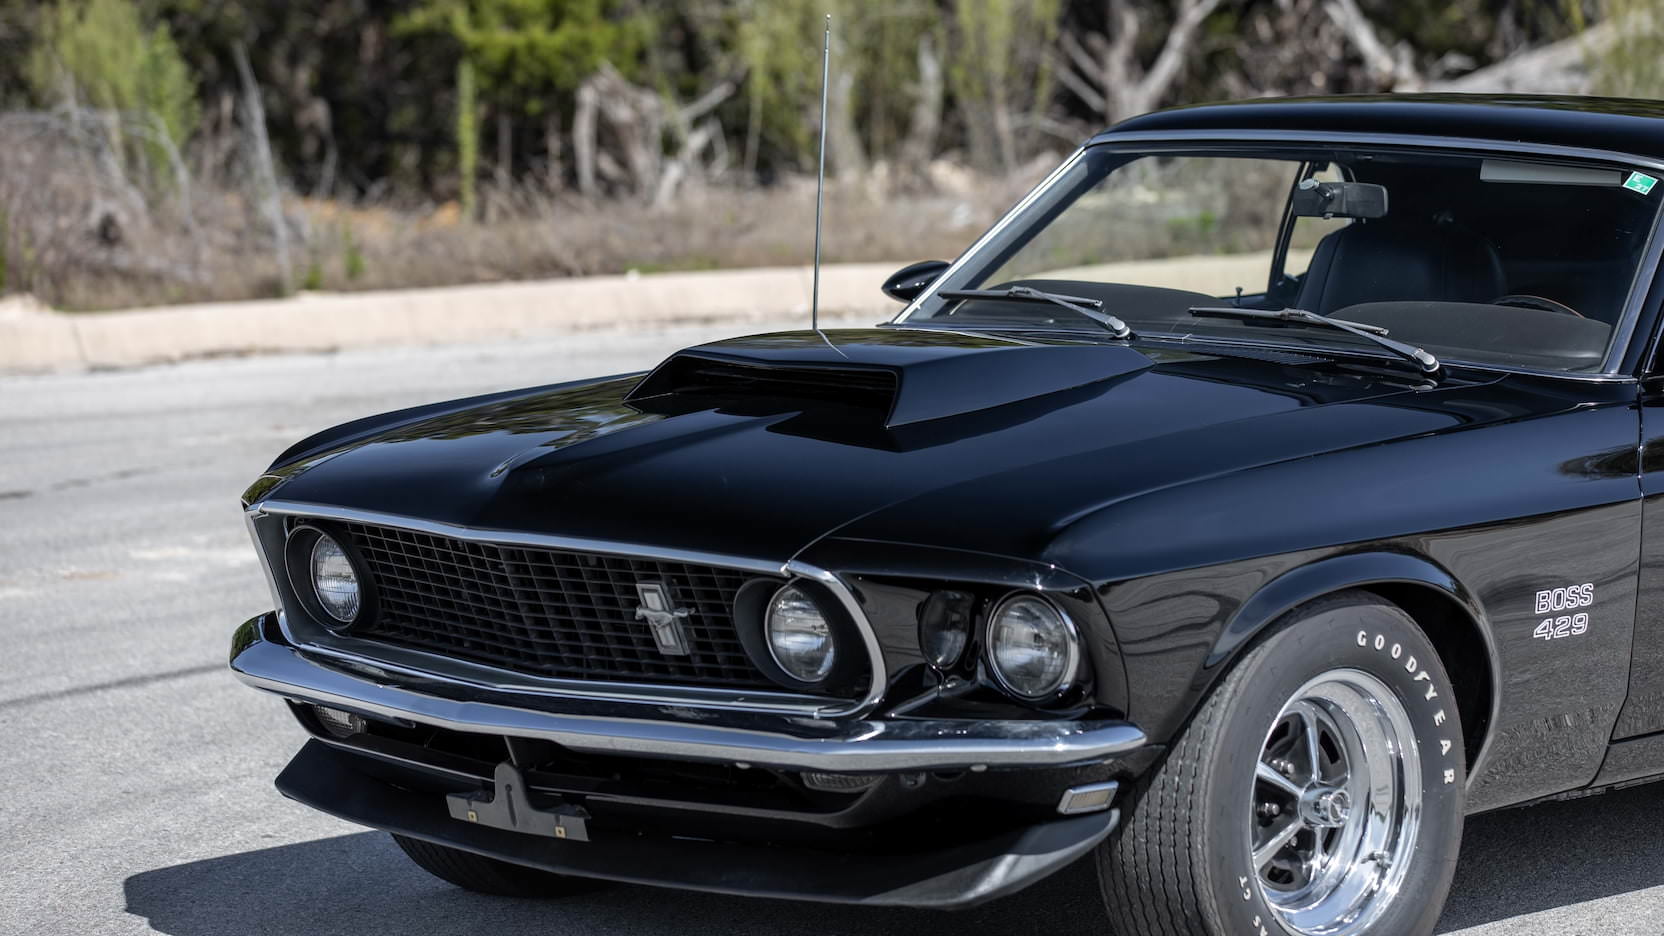 Paul Walker's 1969 Ford Mustang 429 Is For Sale